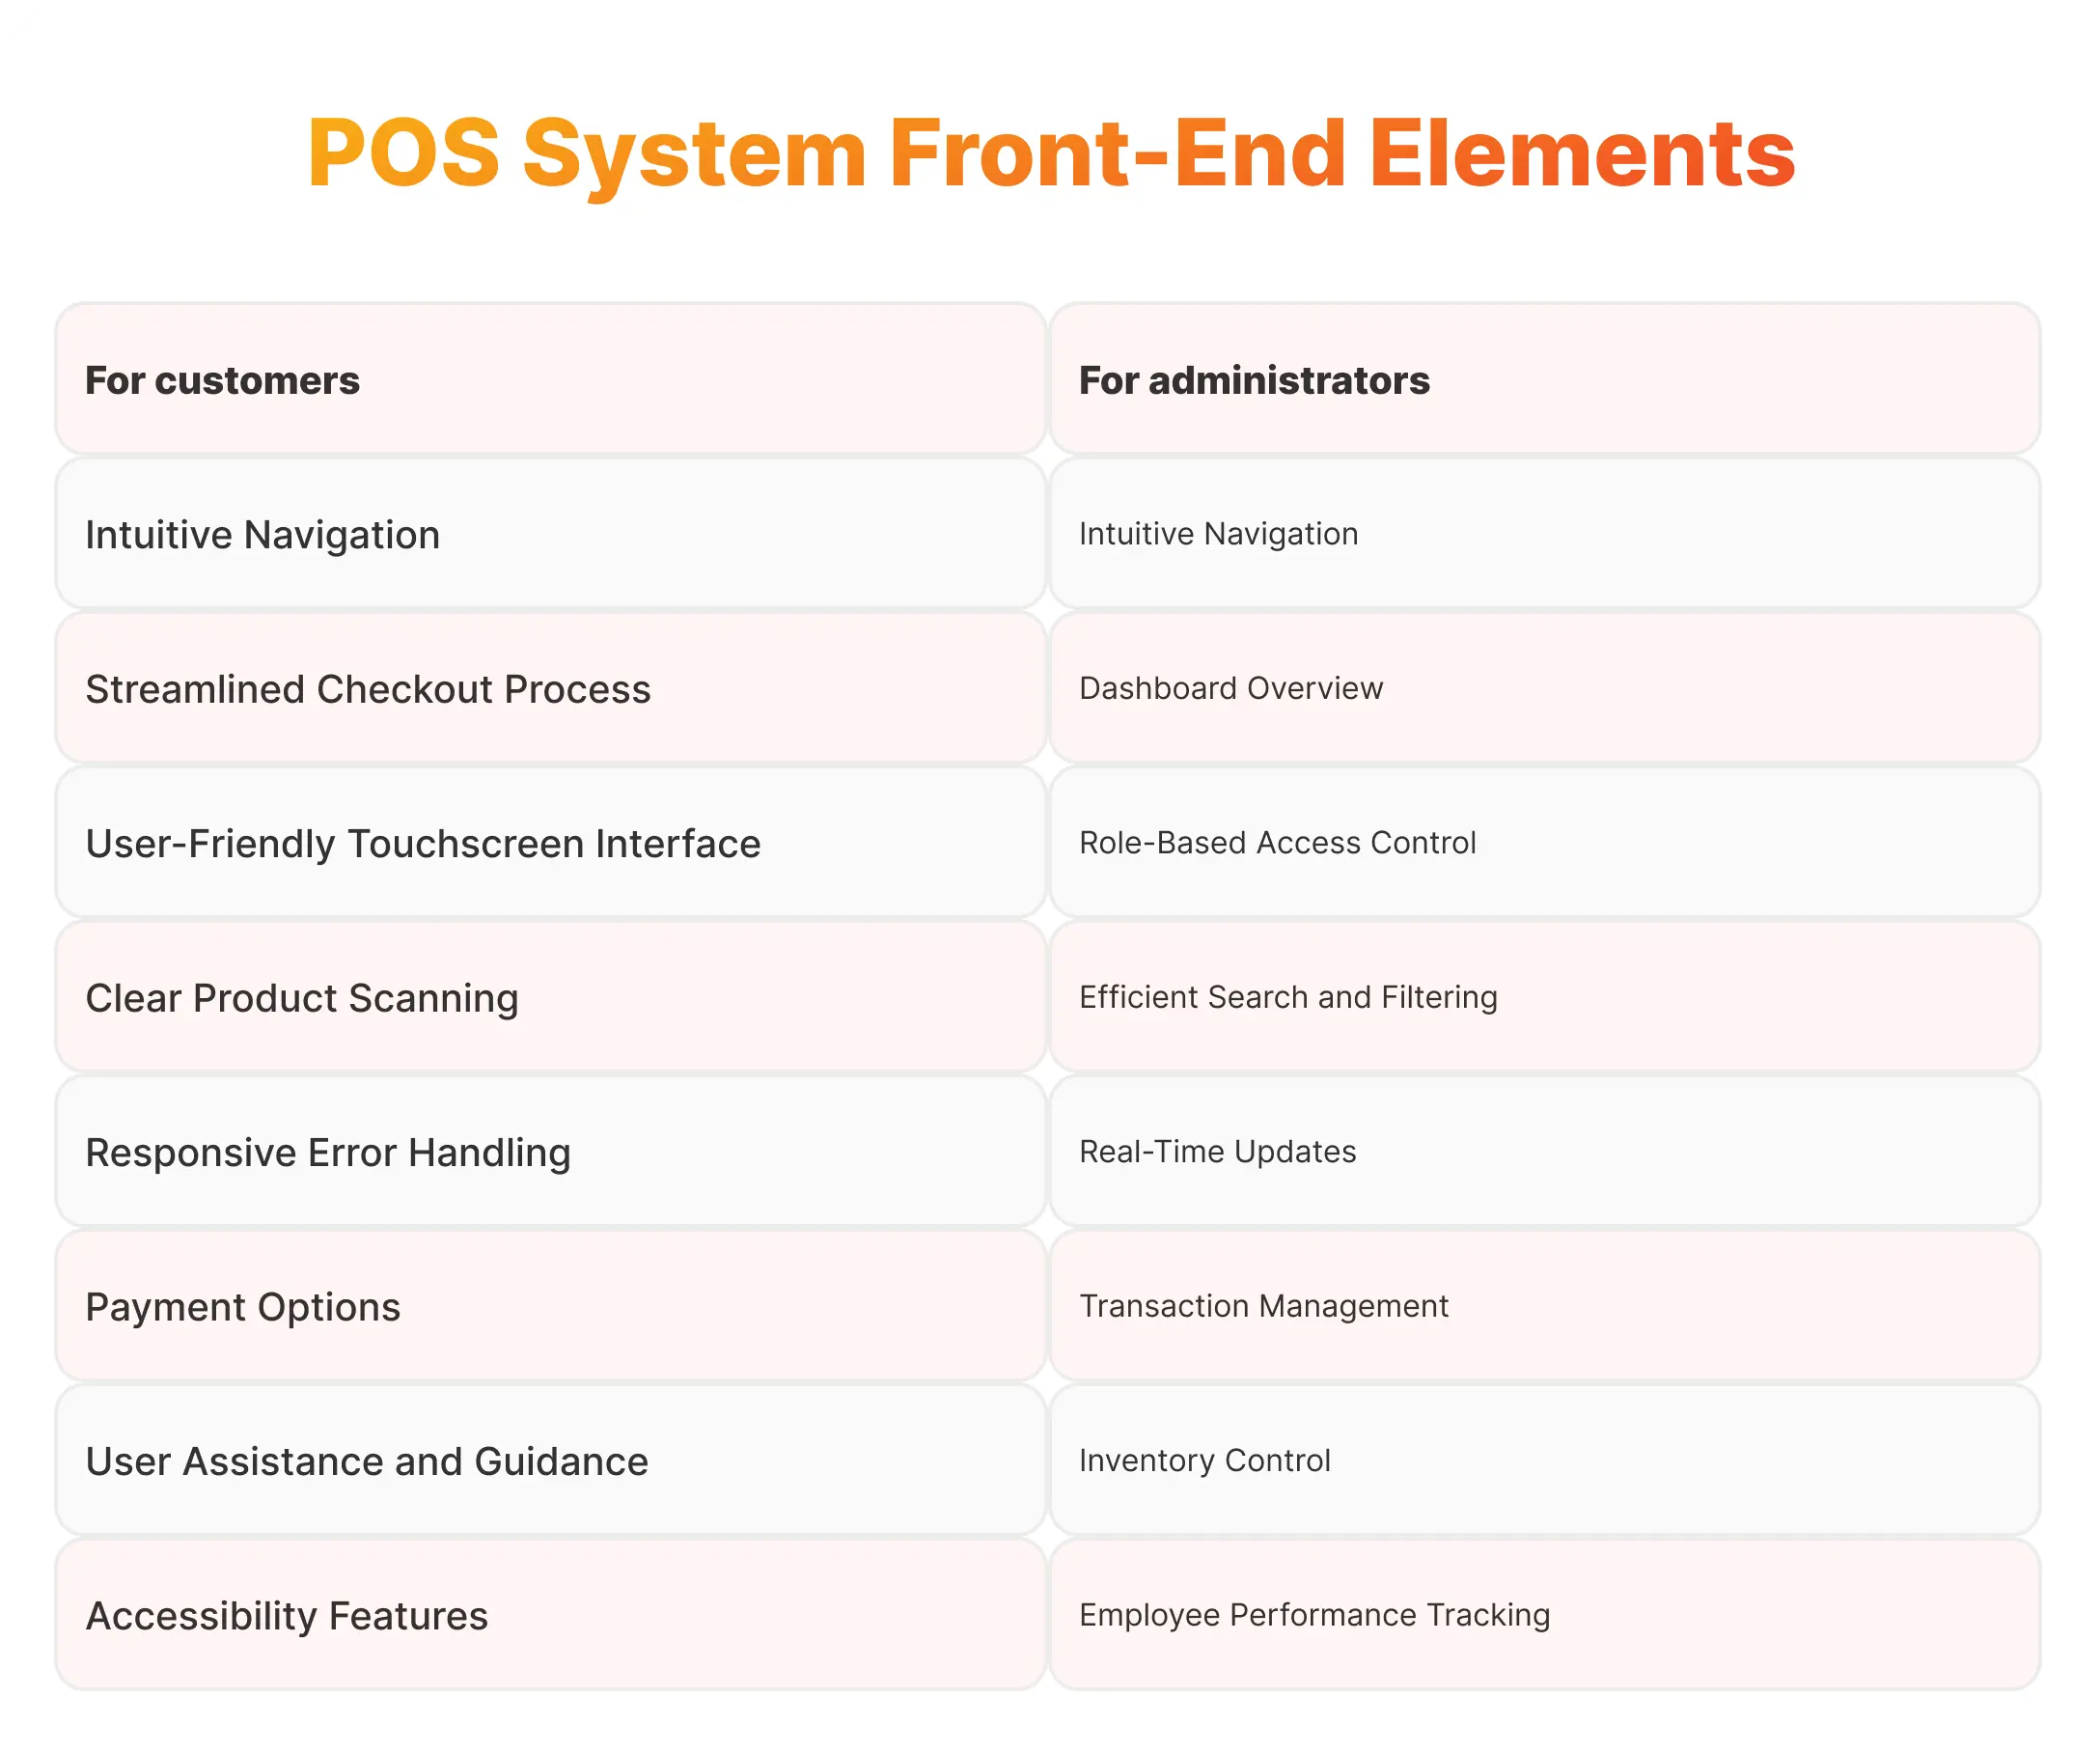 POS System Front-End Elements